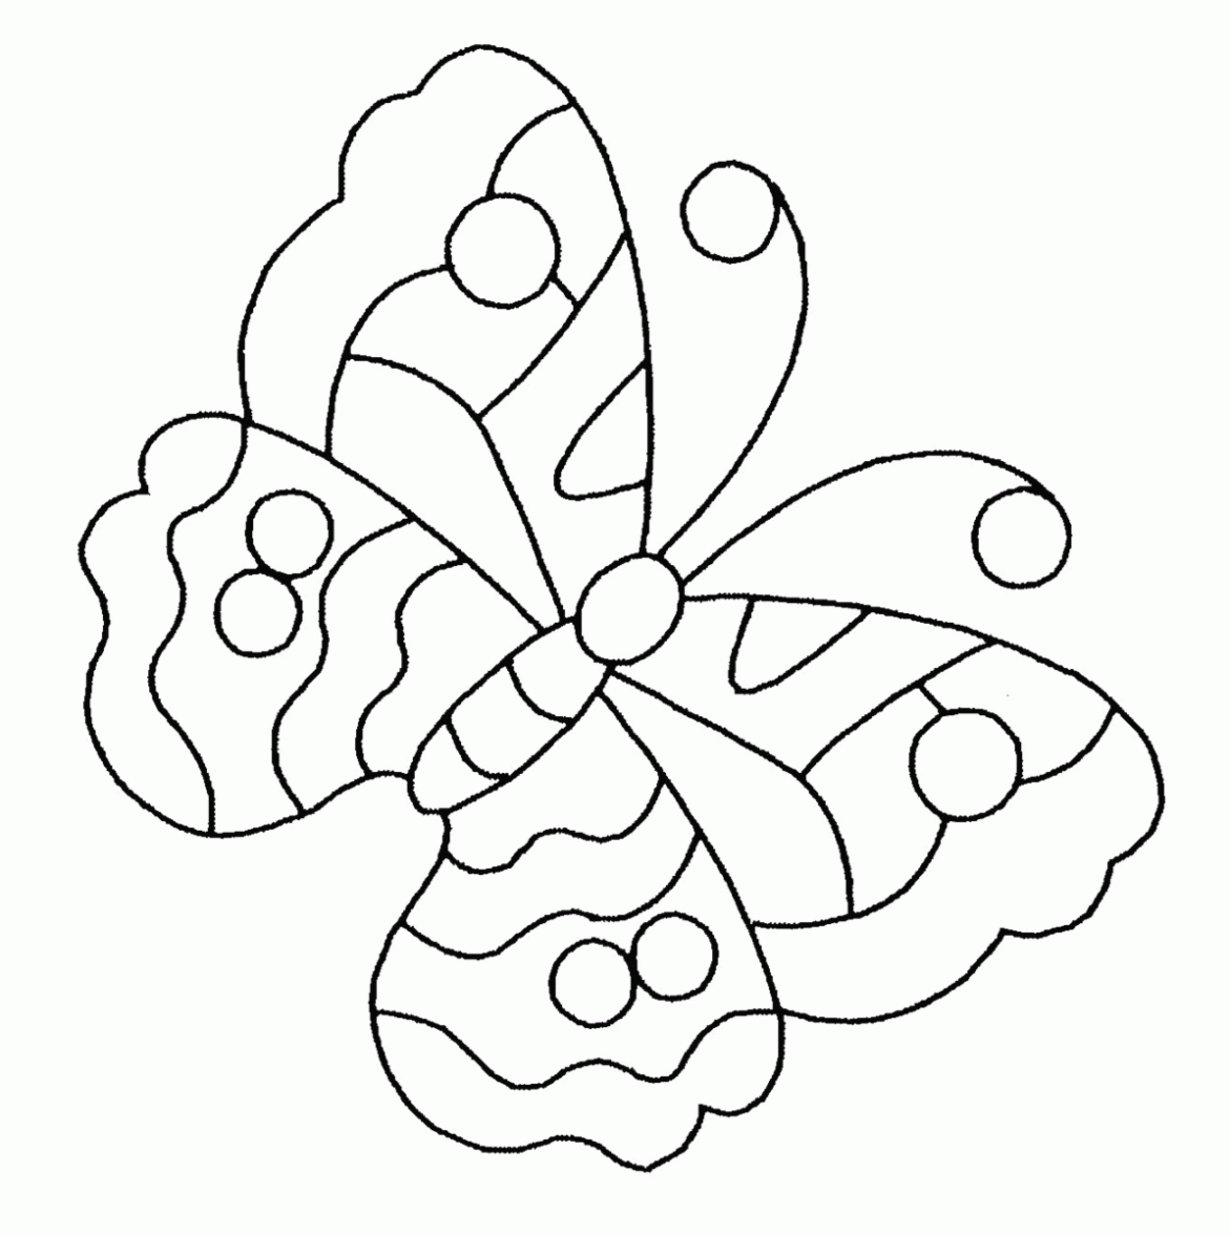 butterfly color pages simple butterfly coloring pages getcoloringpagescom butterfly color pages 